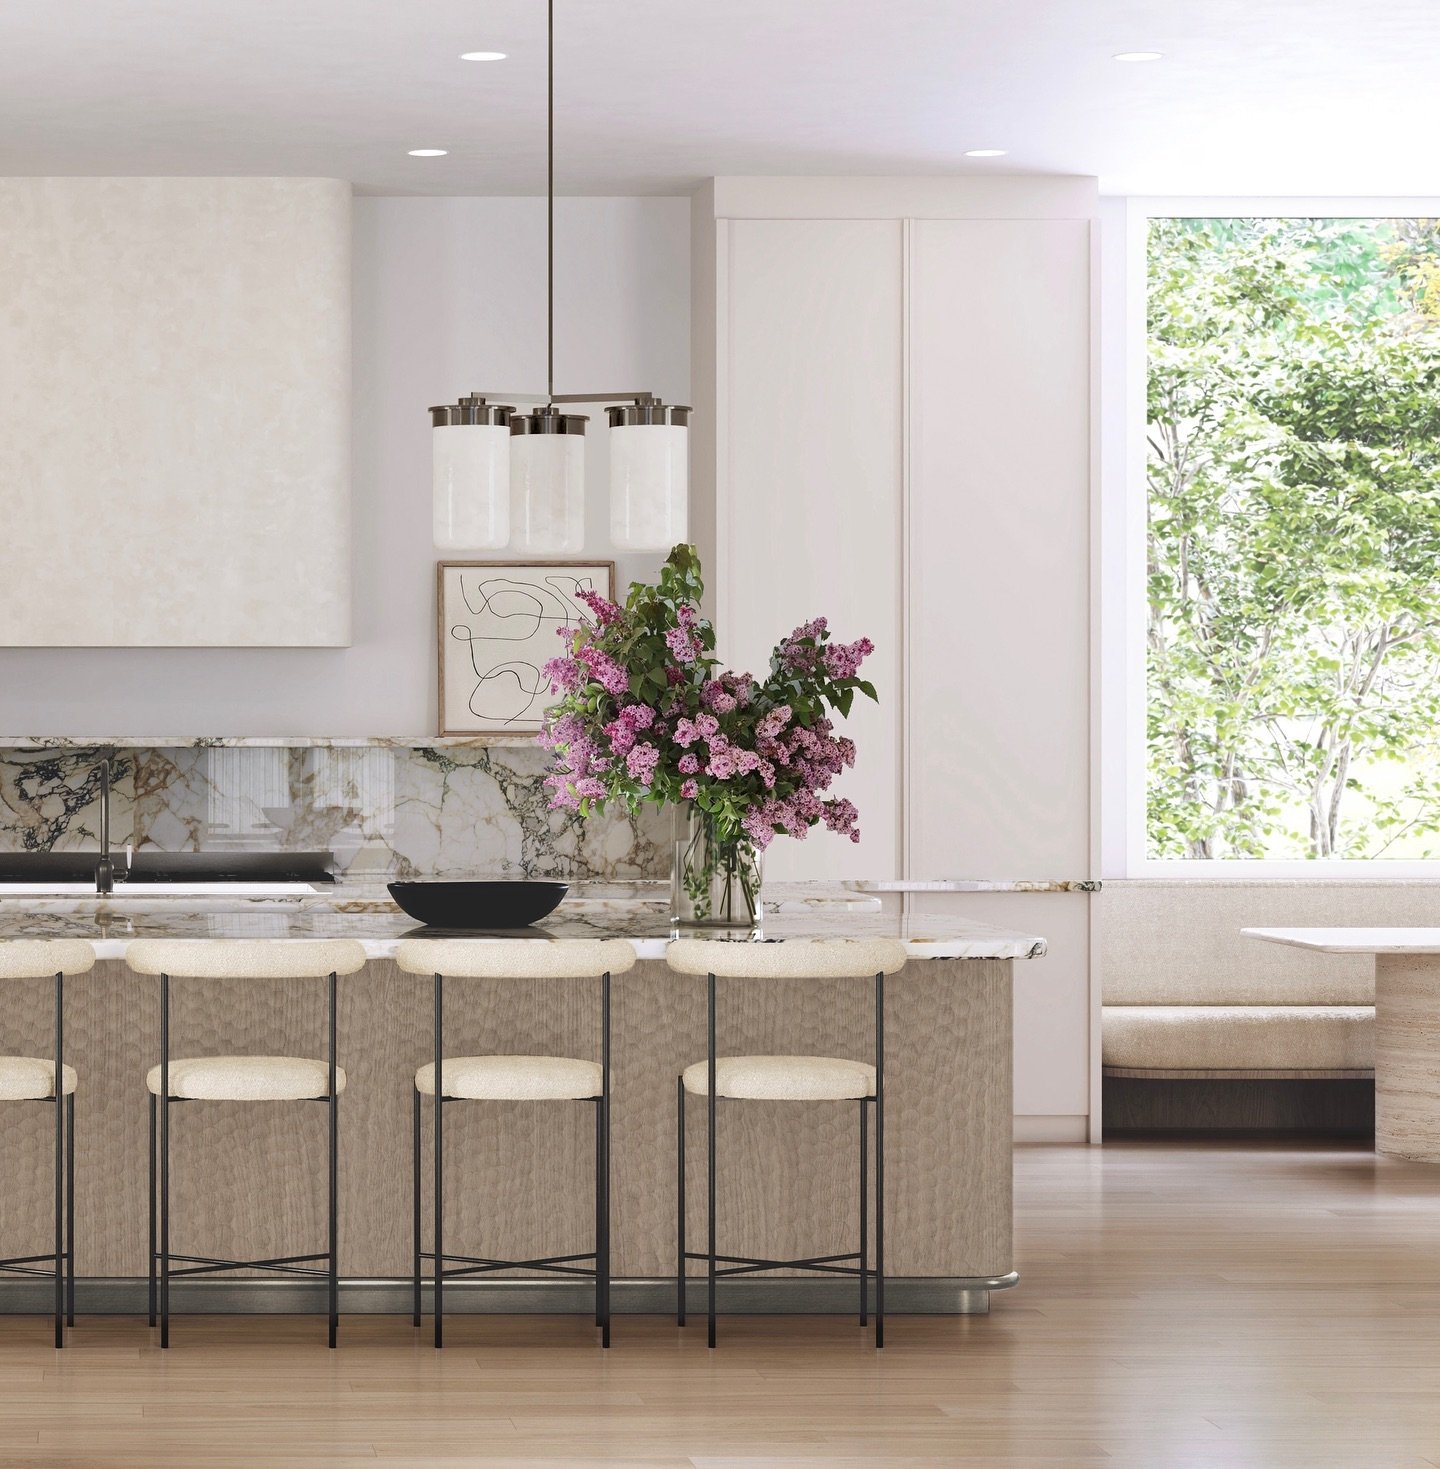 Our client came to us wanting a white kitchen, but wanting it to feel layered, interesting and warm. We infused texture through a hand-chipped oak on the double islands, a smokey pewter footrail (inspired by the champagne bar at @fsmiami 👋), an exte